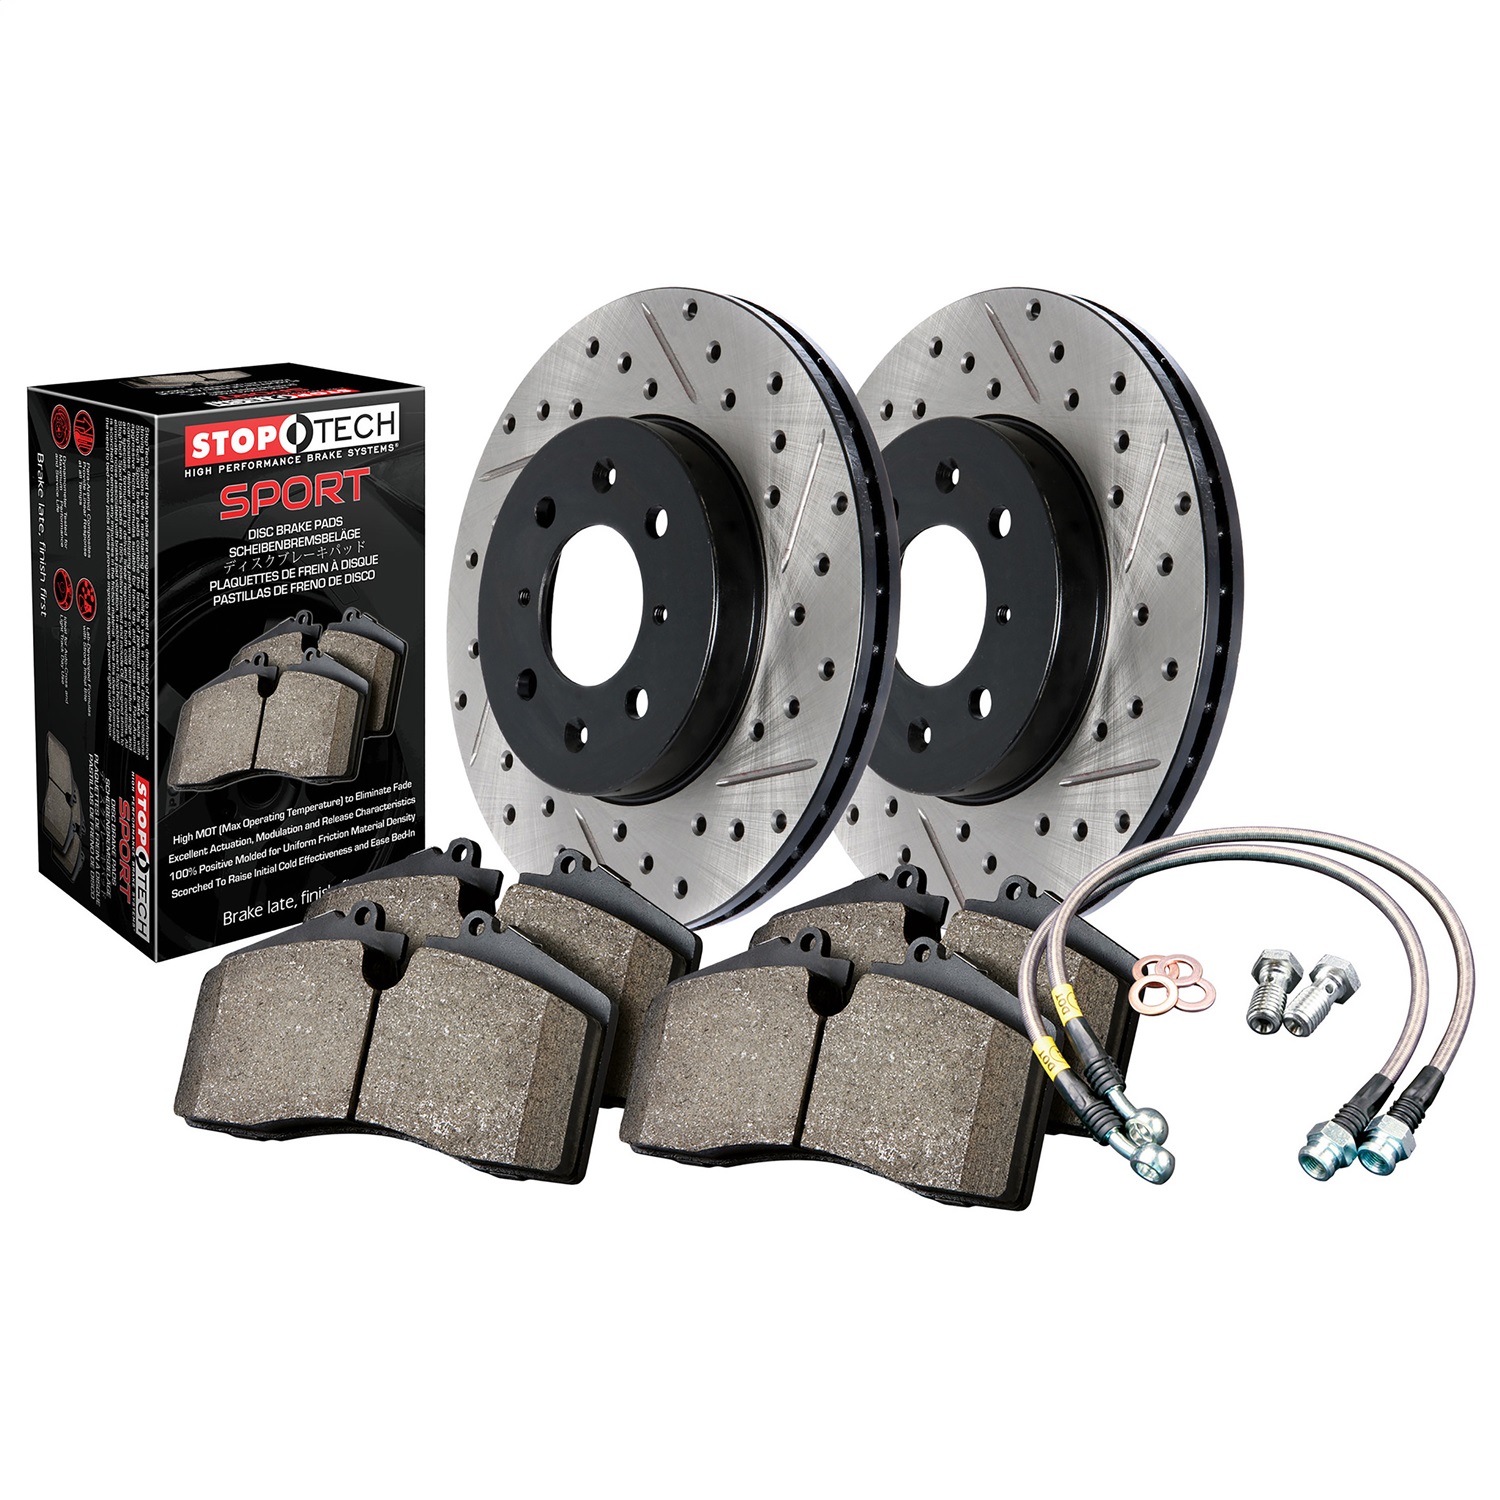 StopTech 978.42020F Sport Disc Brake Kit w/Cross-Drilled And Slotted Rotors